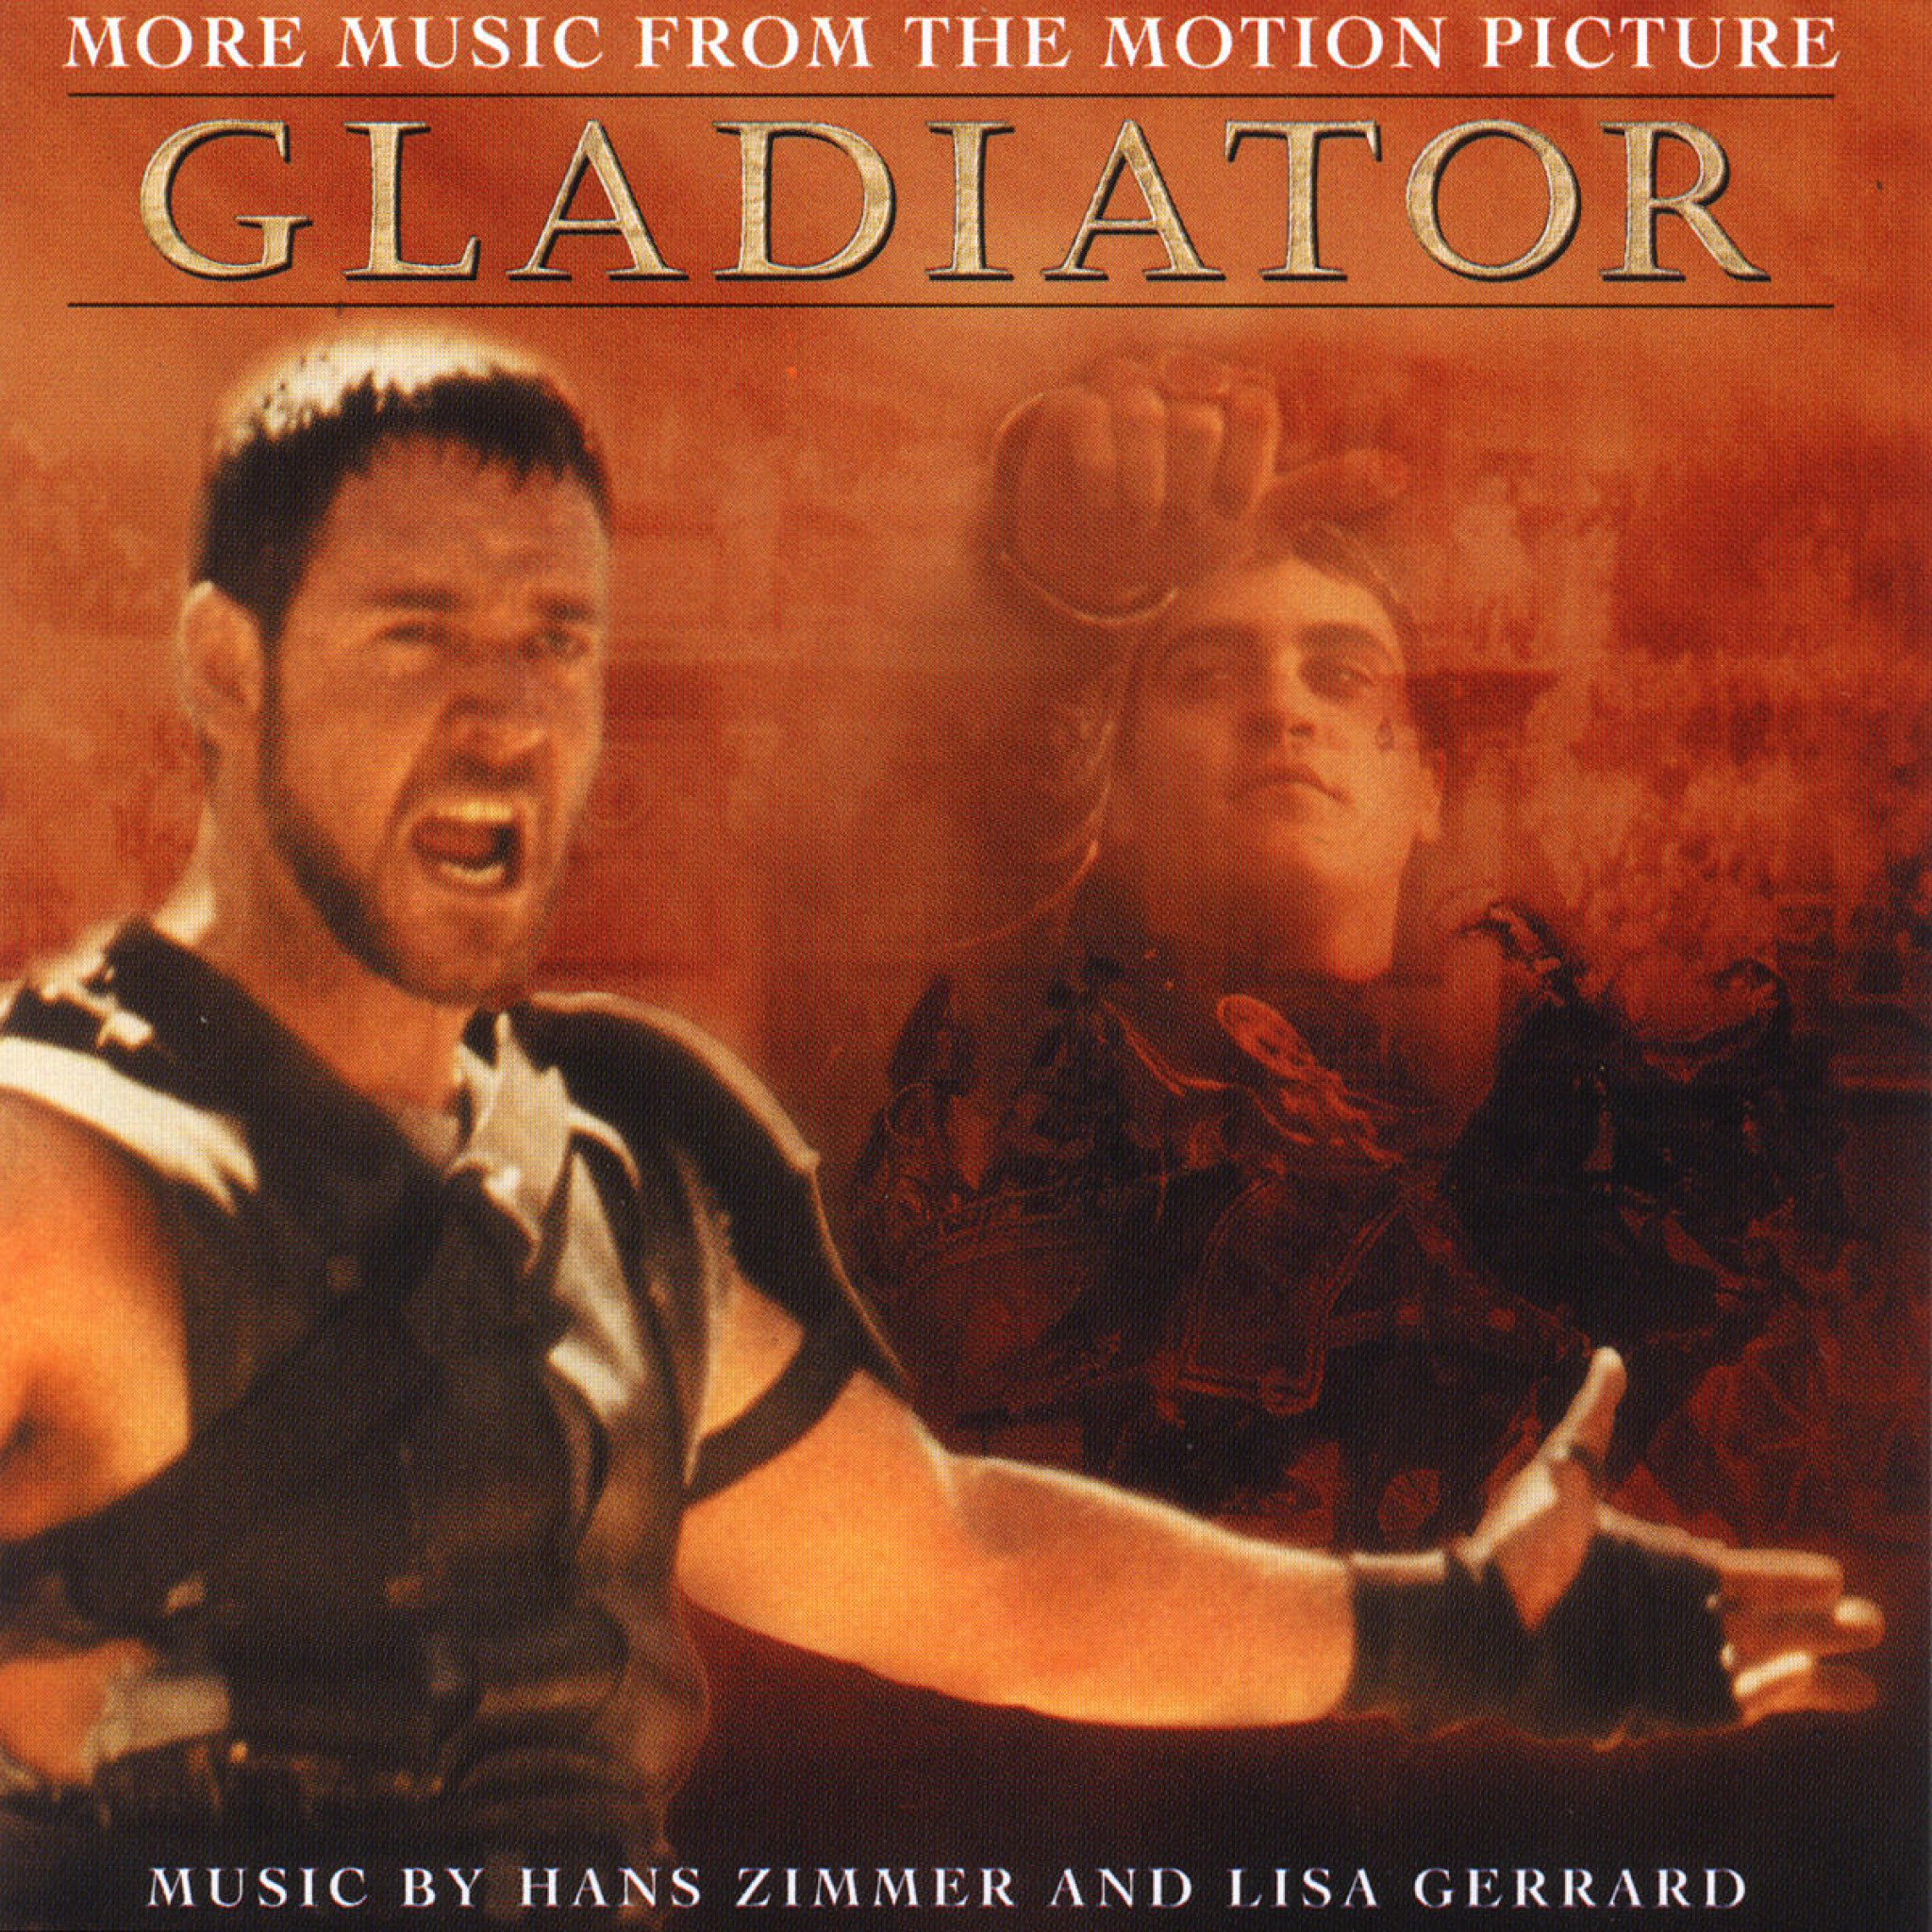 MORE MUSIC FROM GLADIATOR